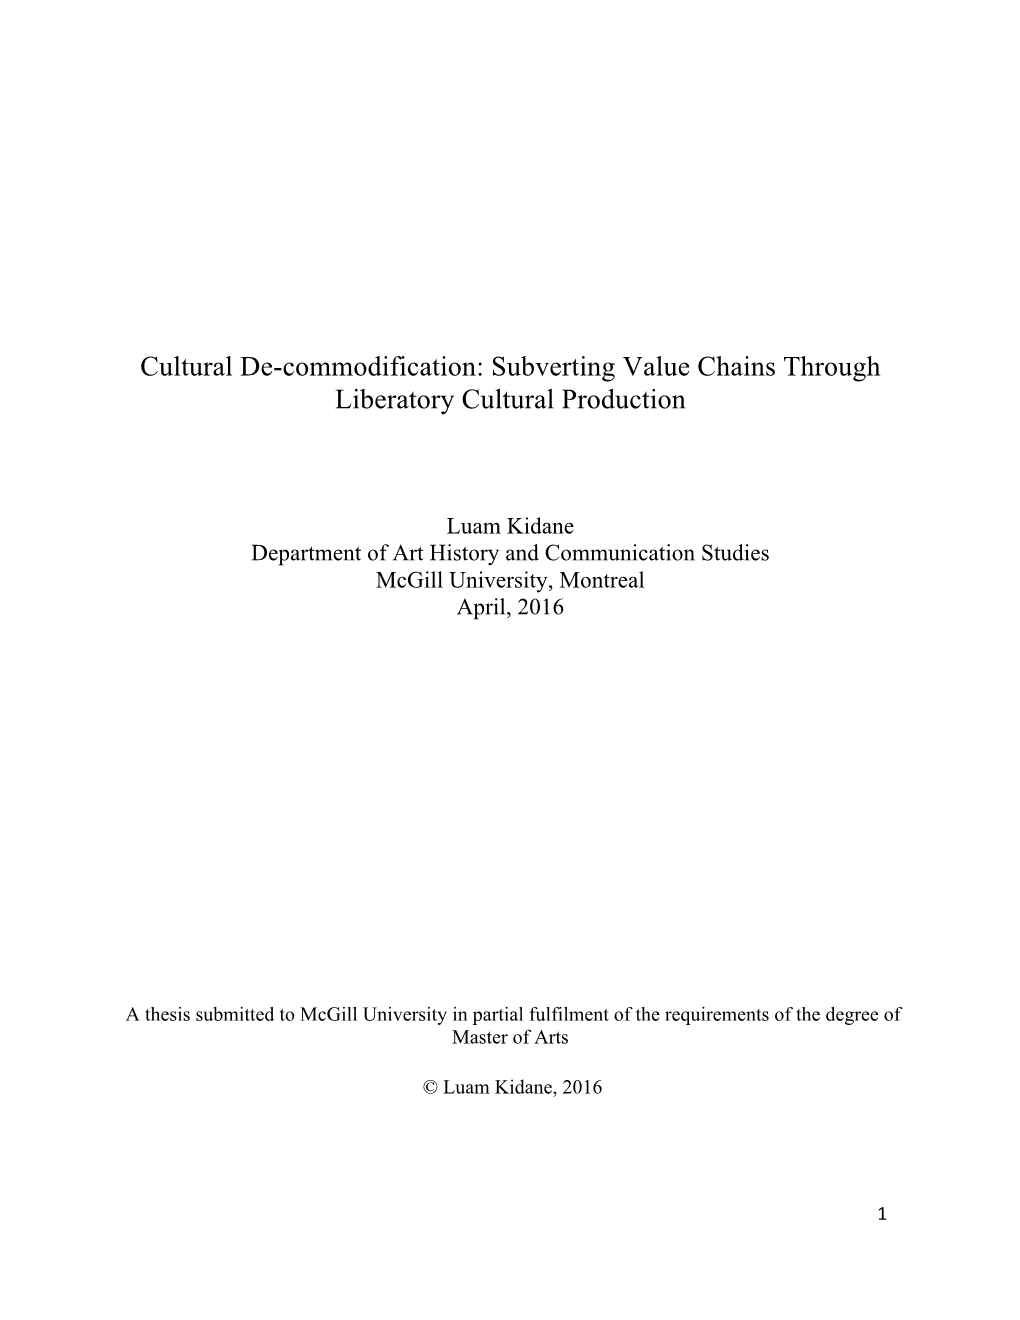 Subverting Value Chains Through Liberatory Cultural Production